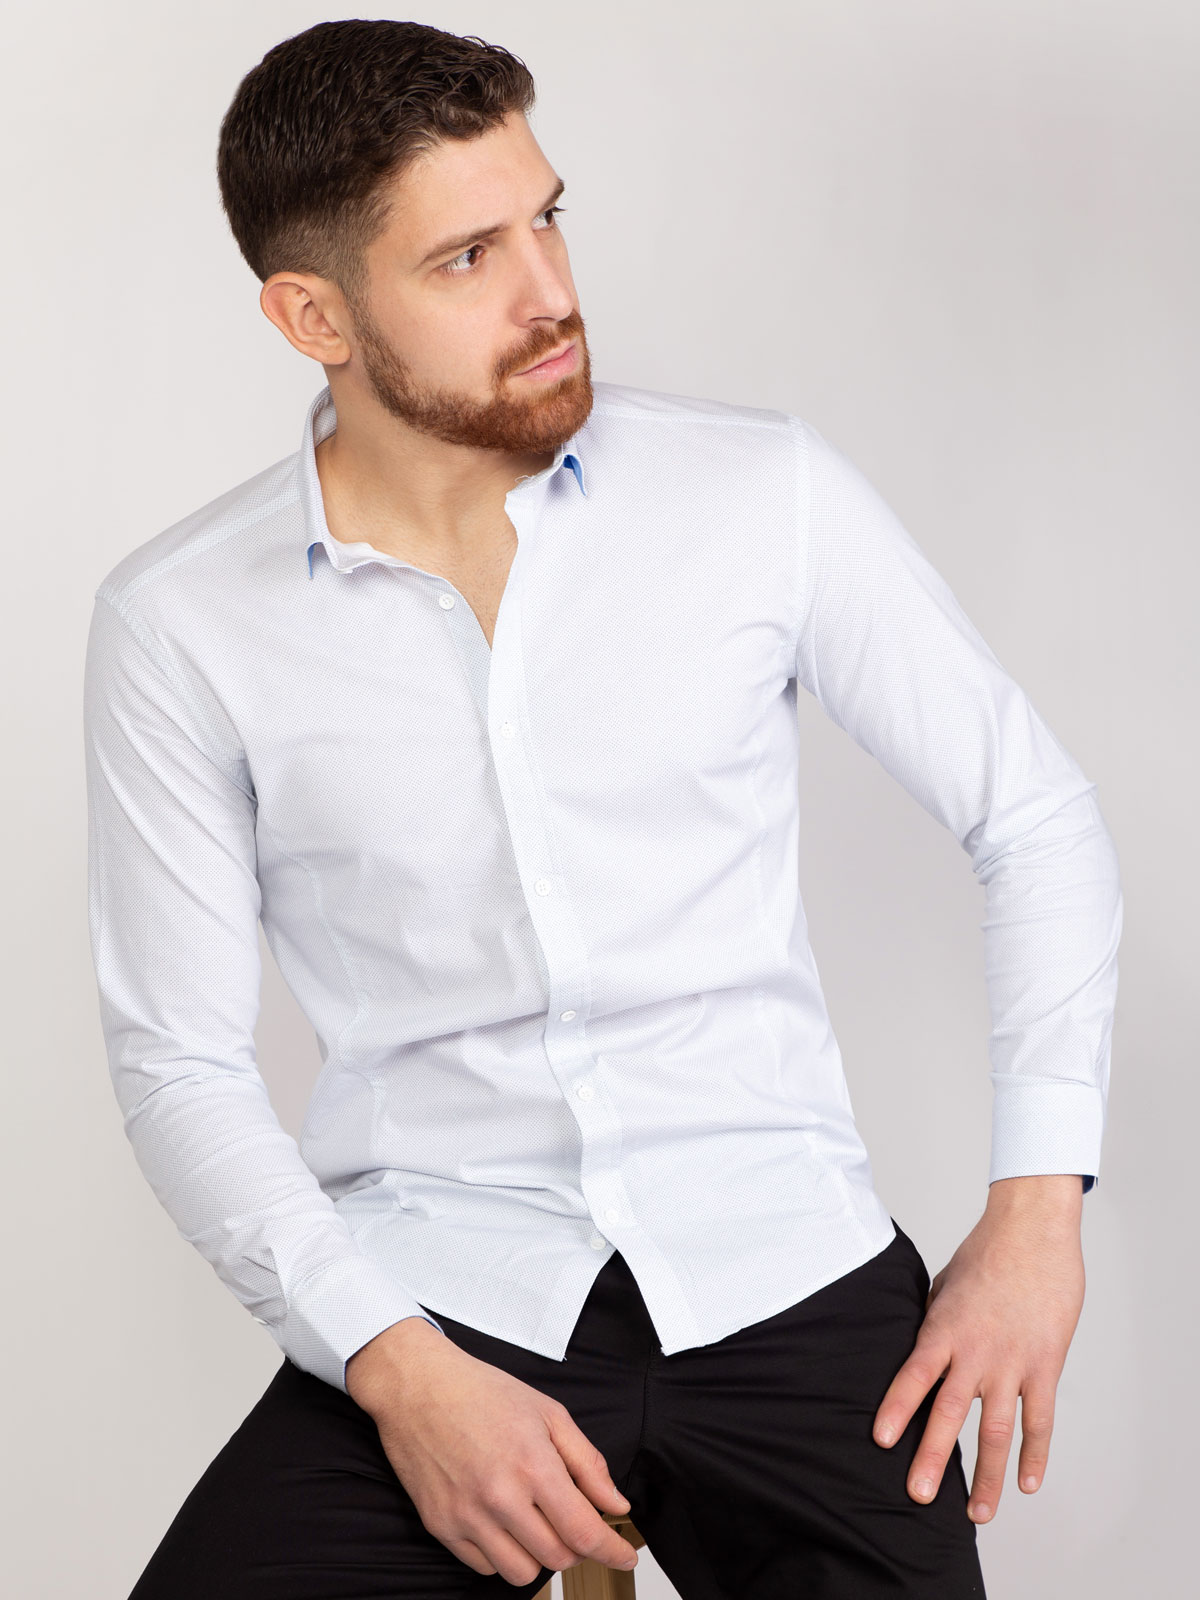  white shirt with small light blue dots  - 21502 € 40.50 img1